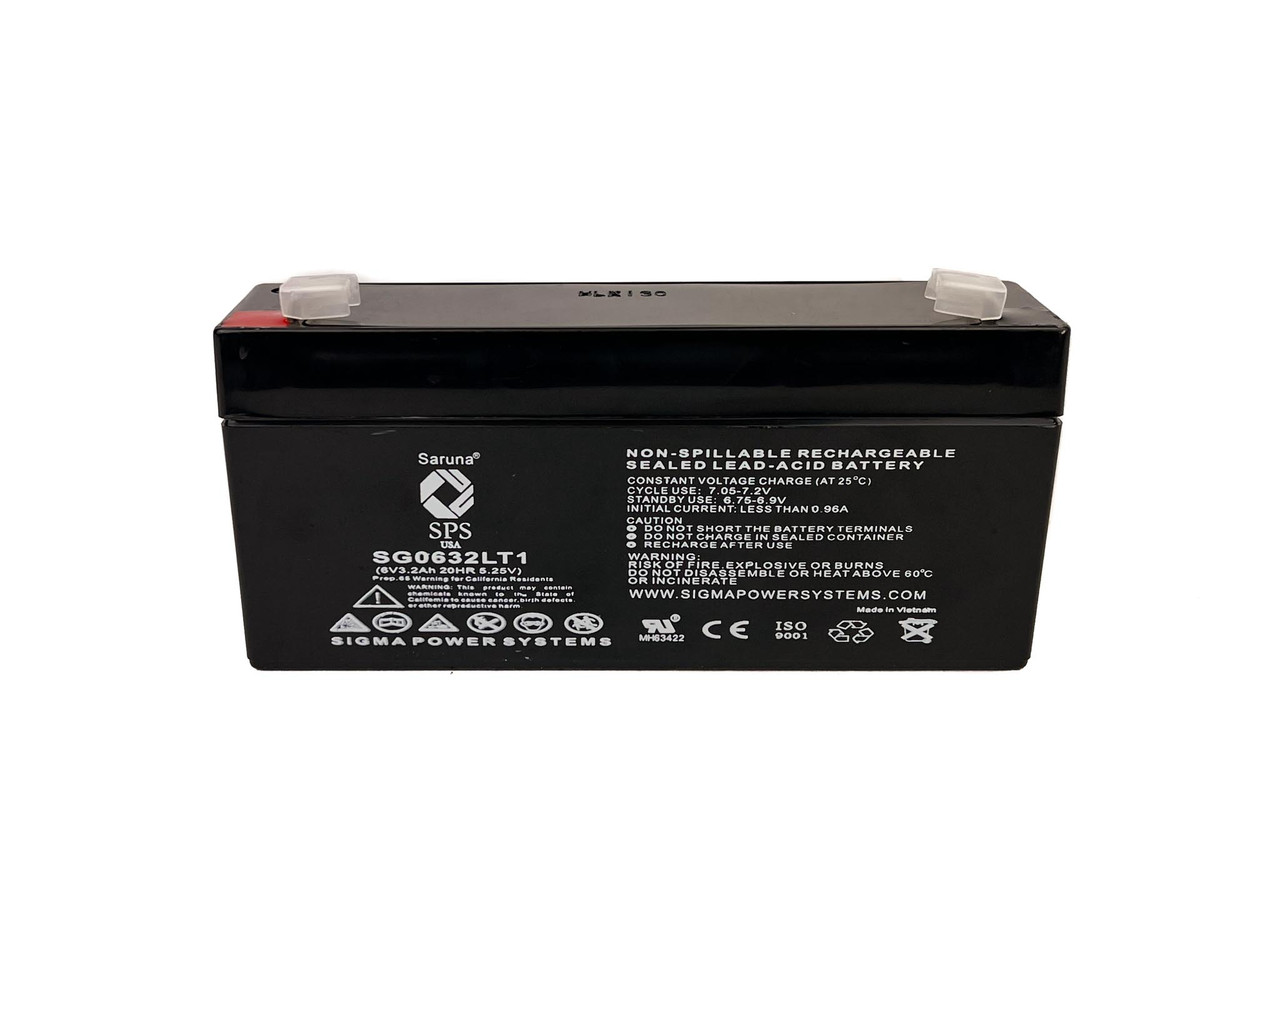 Raion Power RG0632LT1 6V 3.2Ah Compatible Replacement Battery for Ivac Medical Systems 580EE Infusion Pump